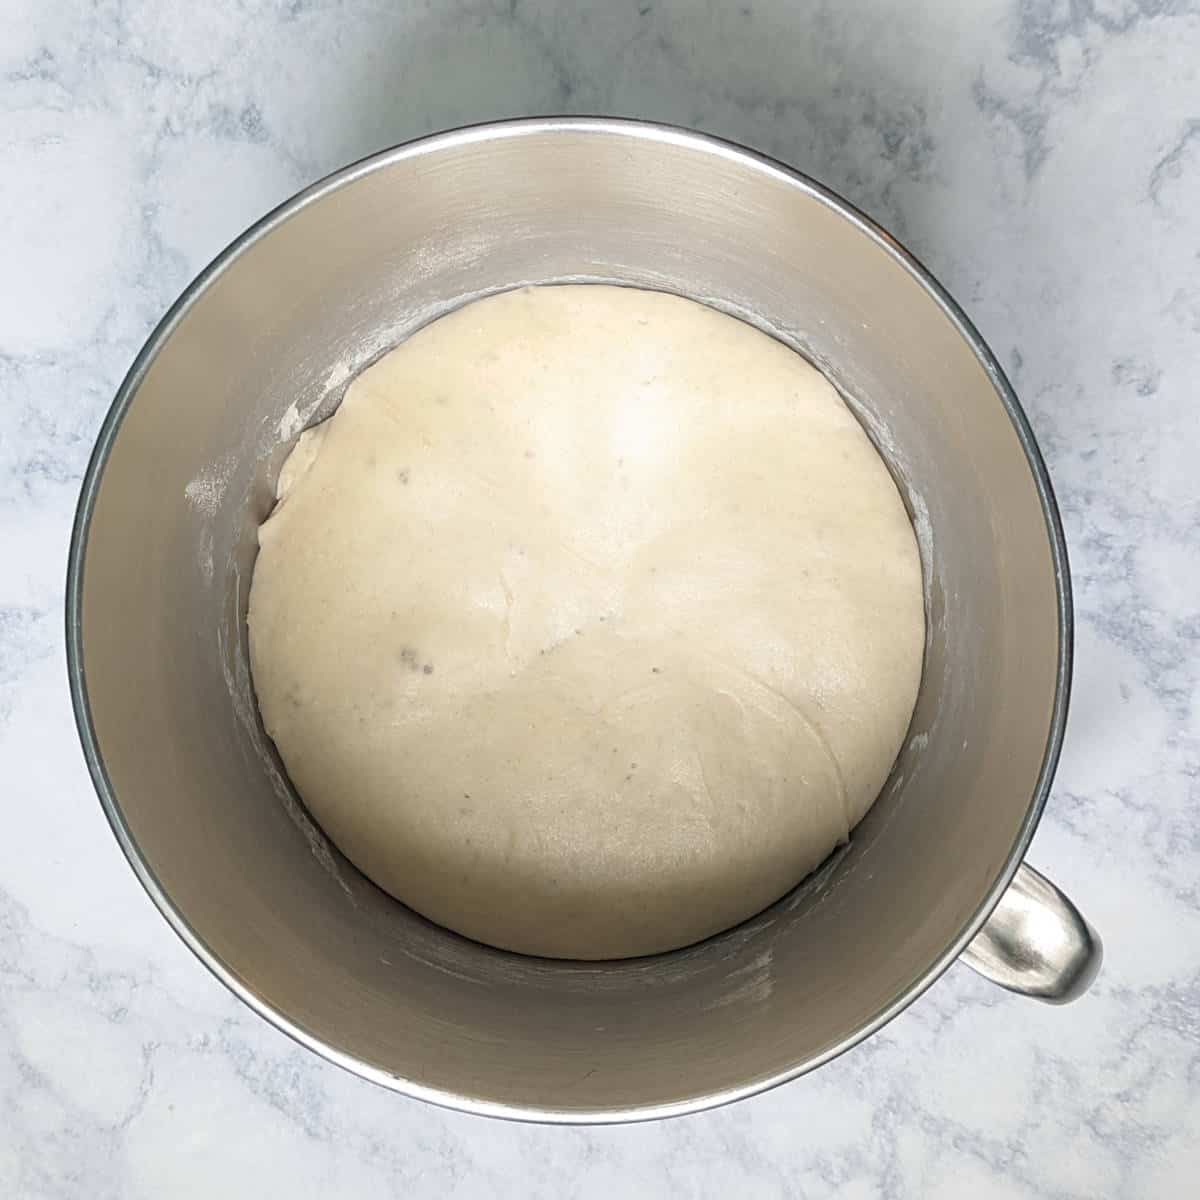 first dough, after overnight rise